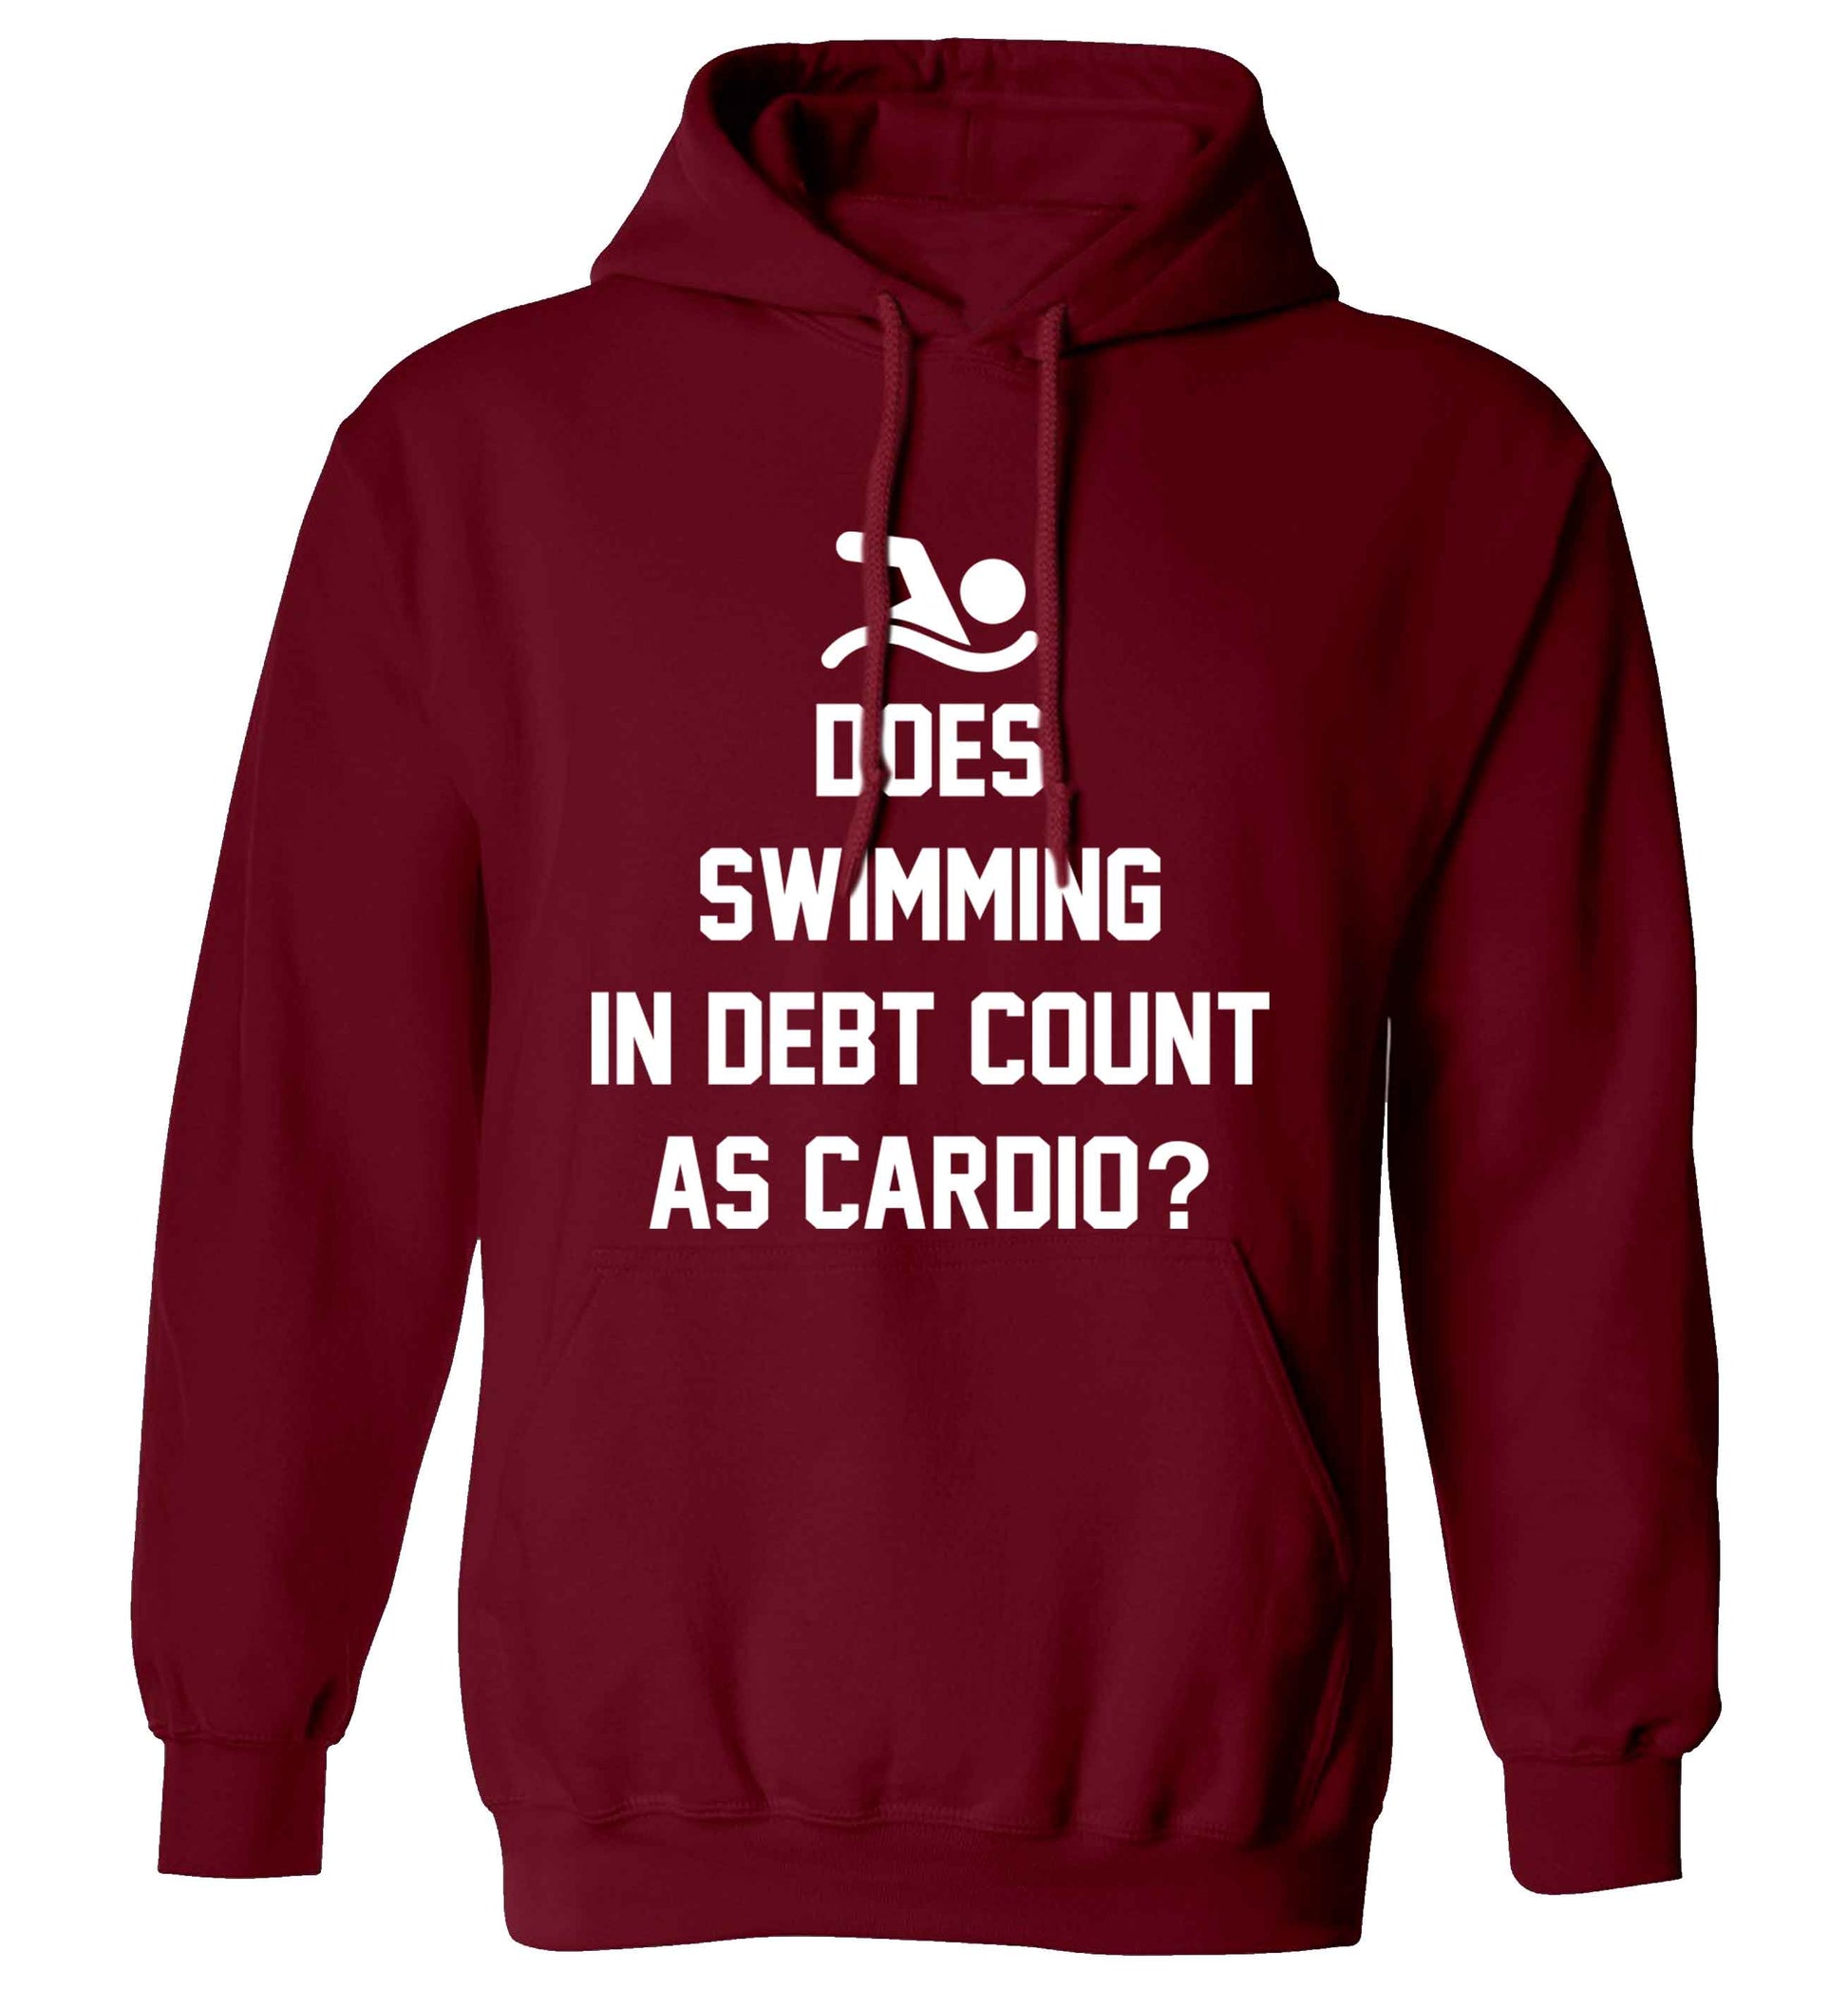 Does swimming in debt count as cardio? adults unisex maroon hoodie 2XL